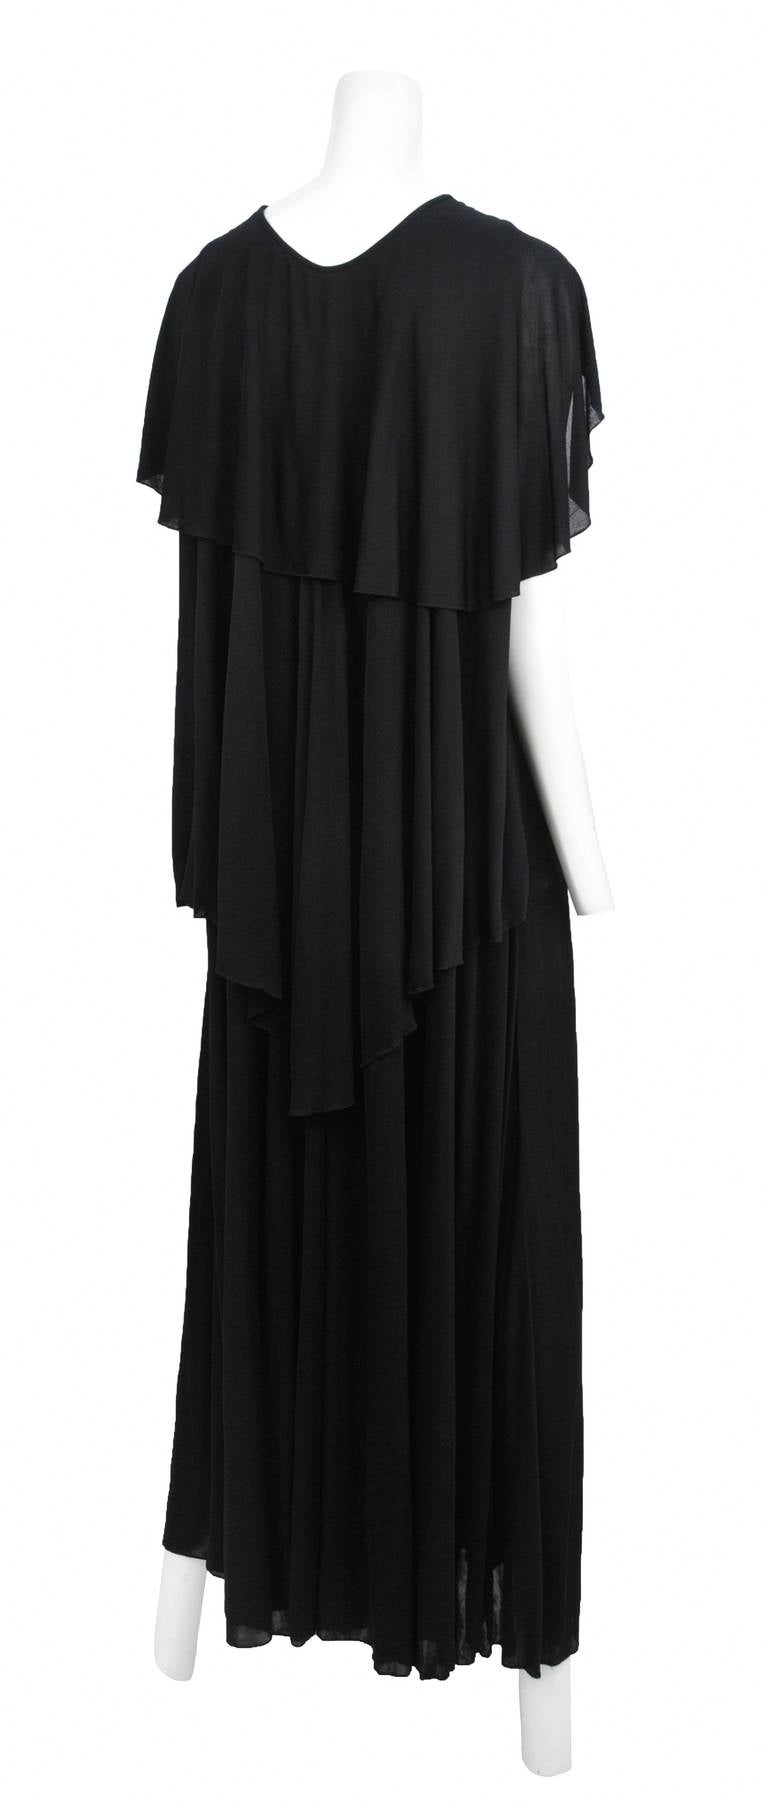 Vintage Holly's Harp black jersey caftan gown with butterfly cape that ties in front with deep V neck.